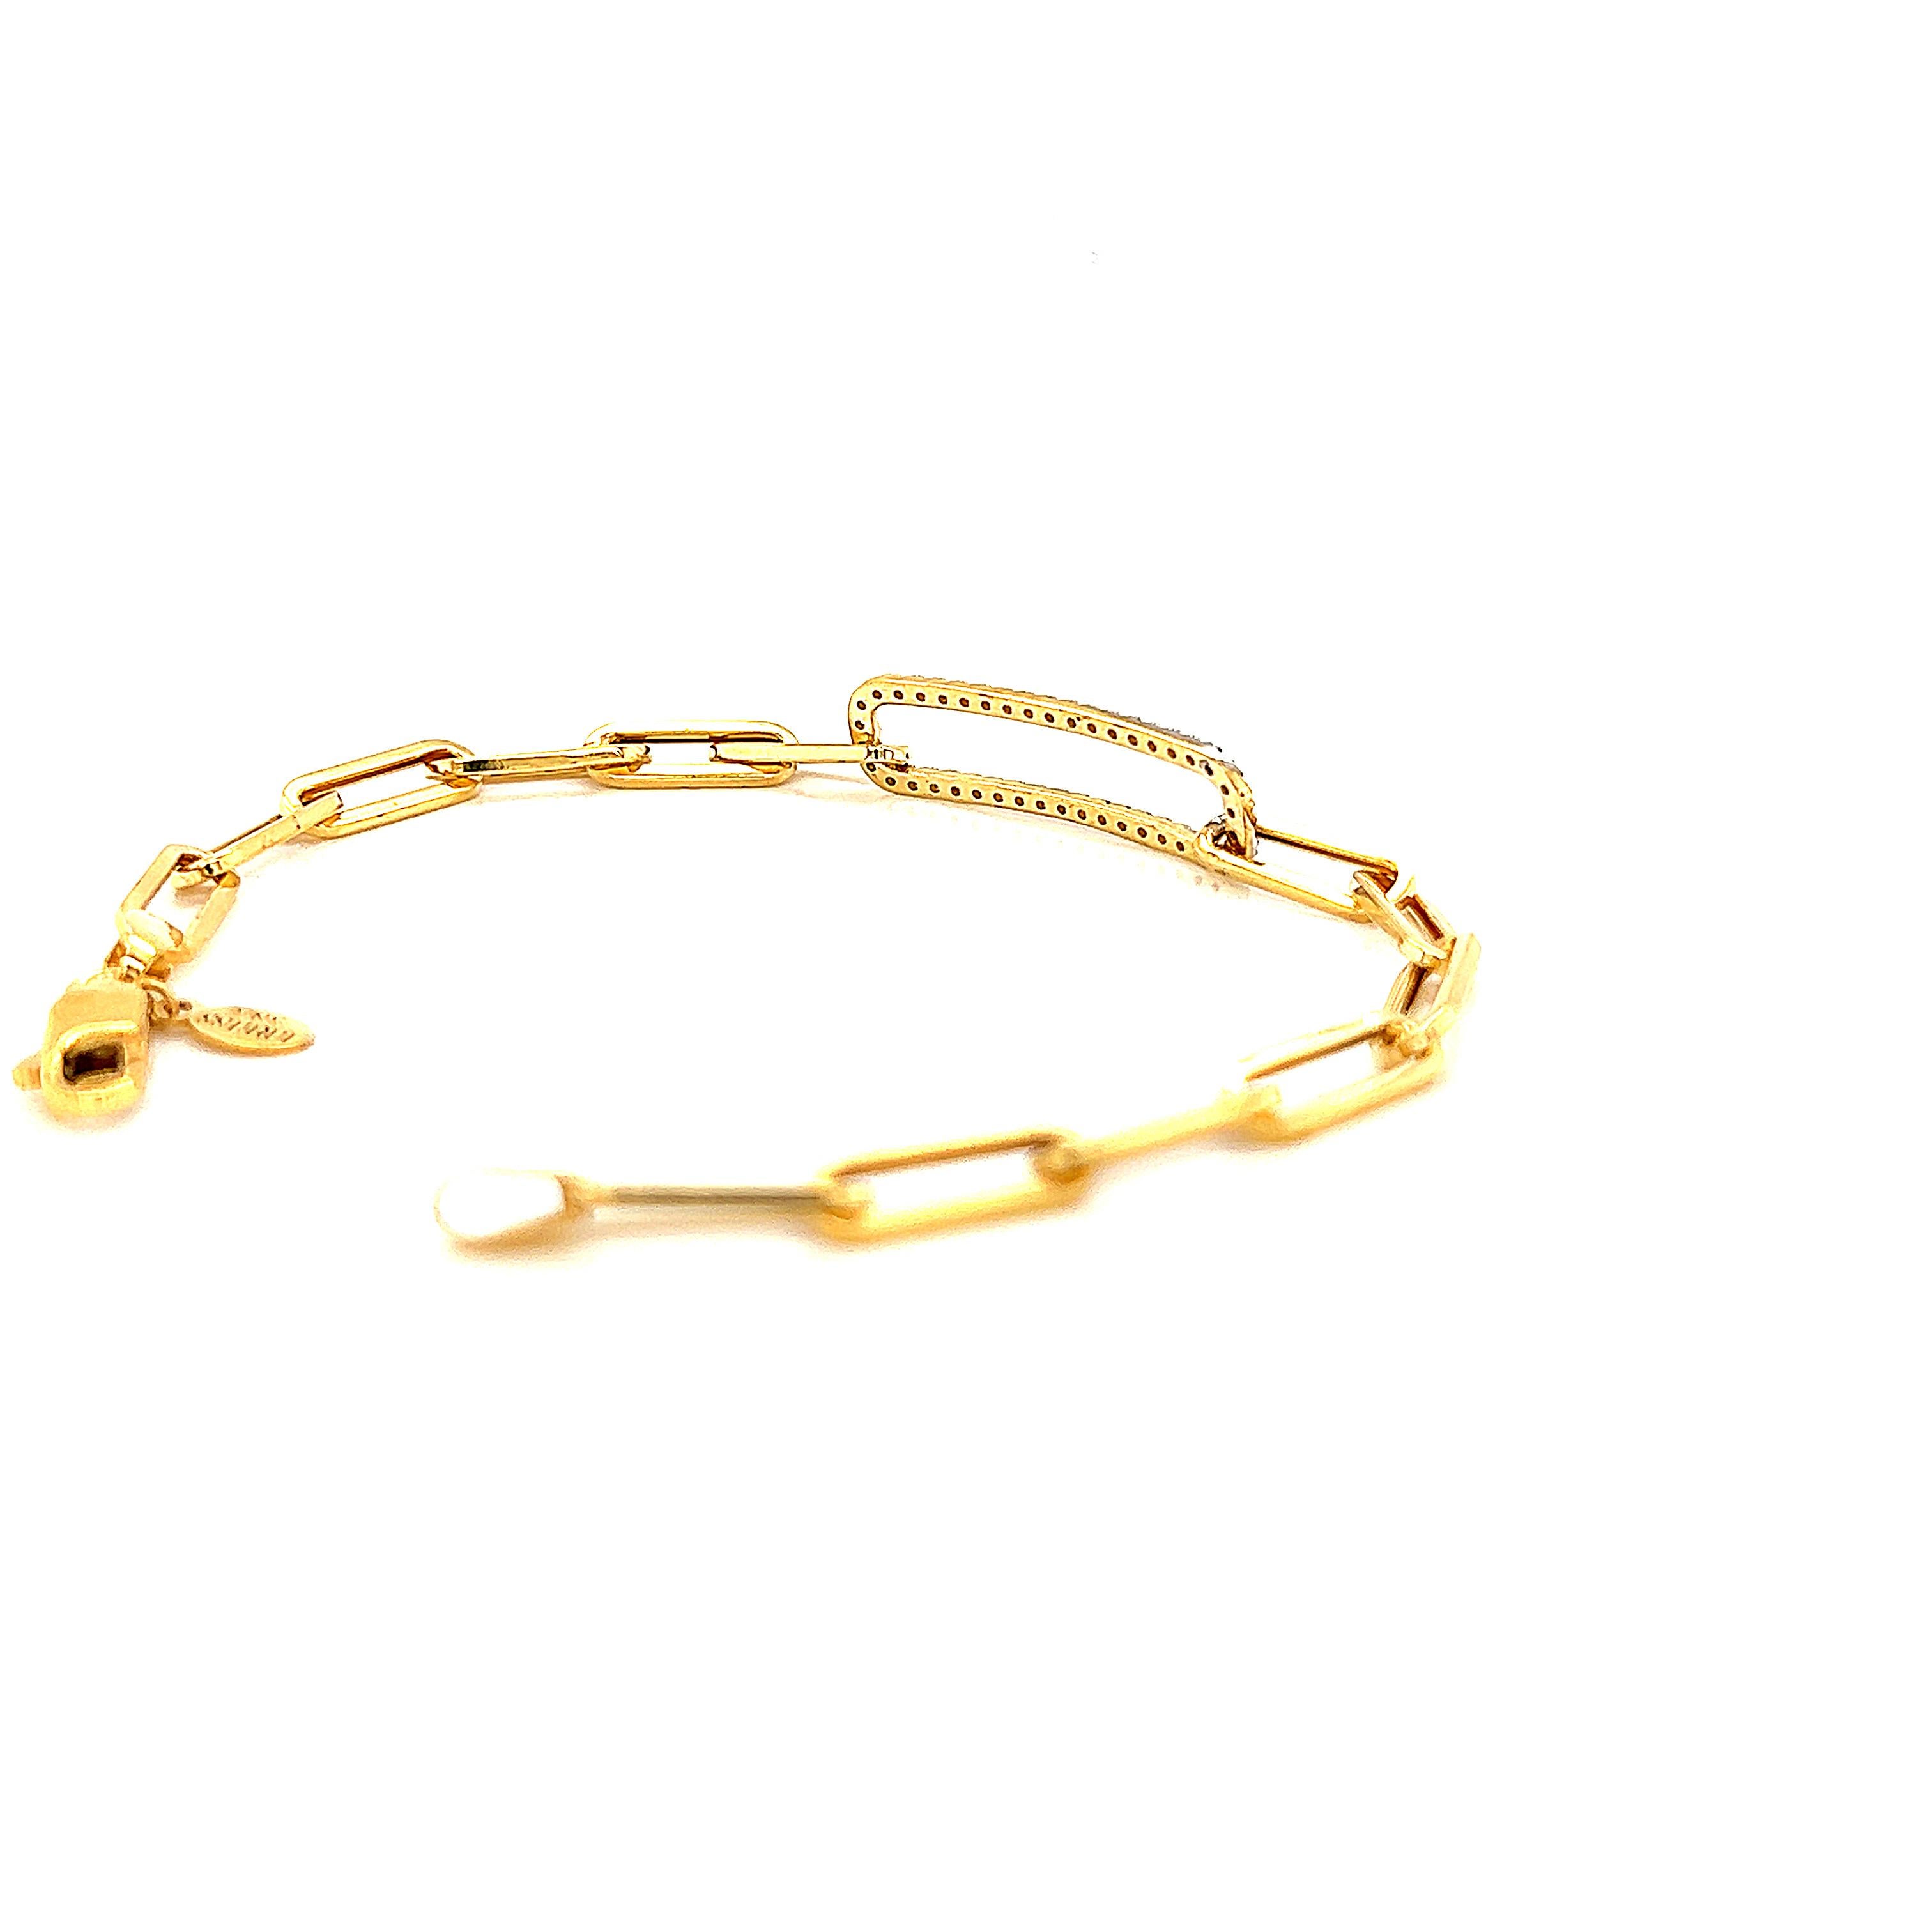 Hand-Crafted 14K Yellow Gold Open Link ID Bar Bracelet In New Condition For Sale In Great Neck, NY